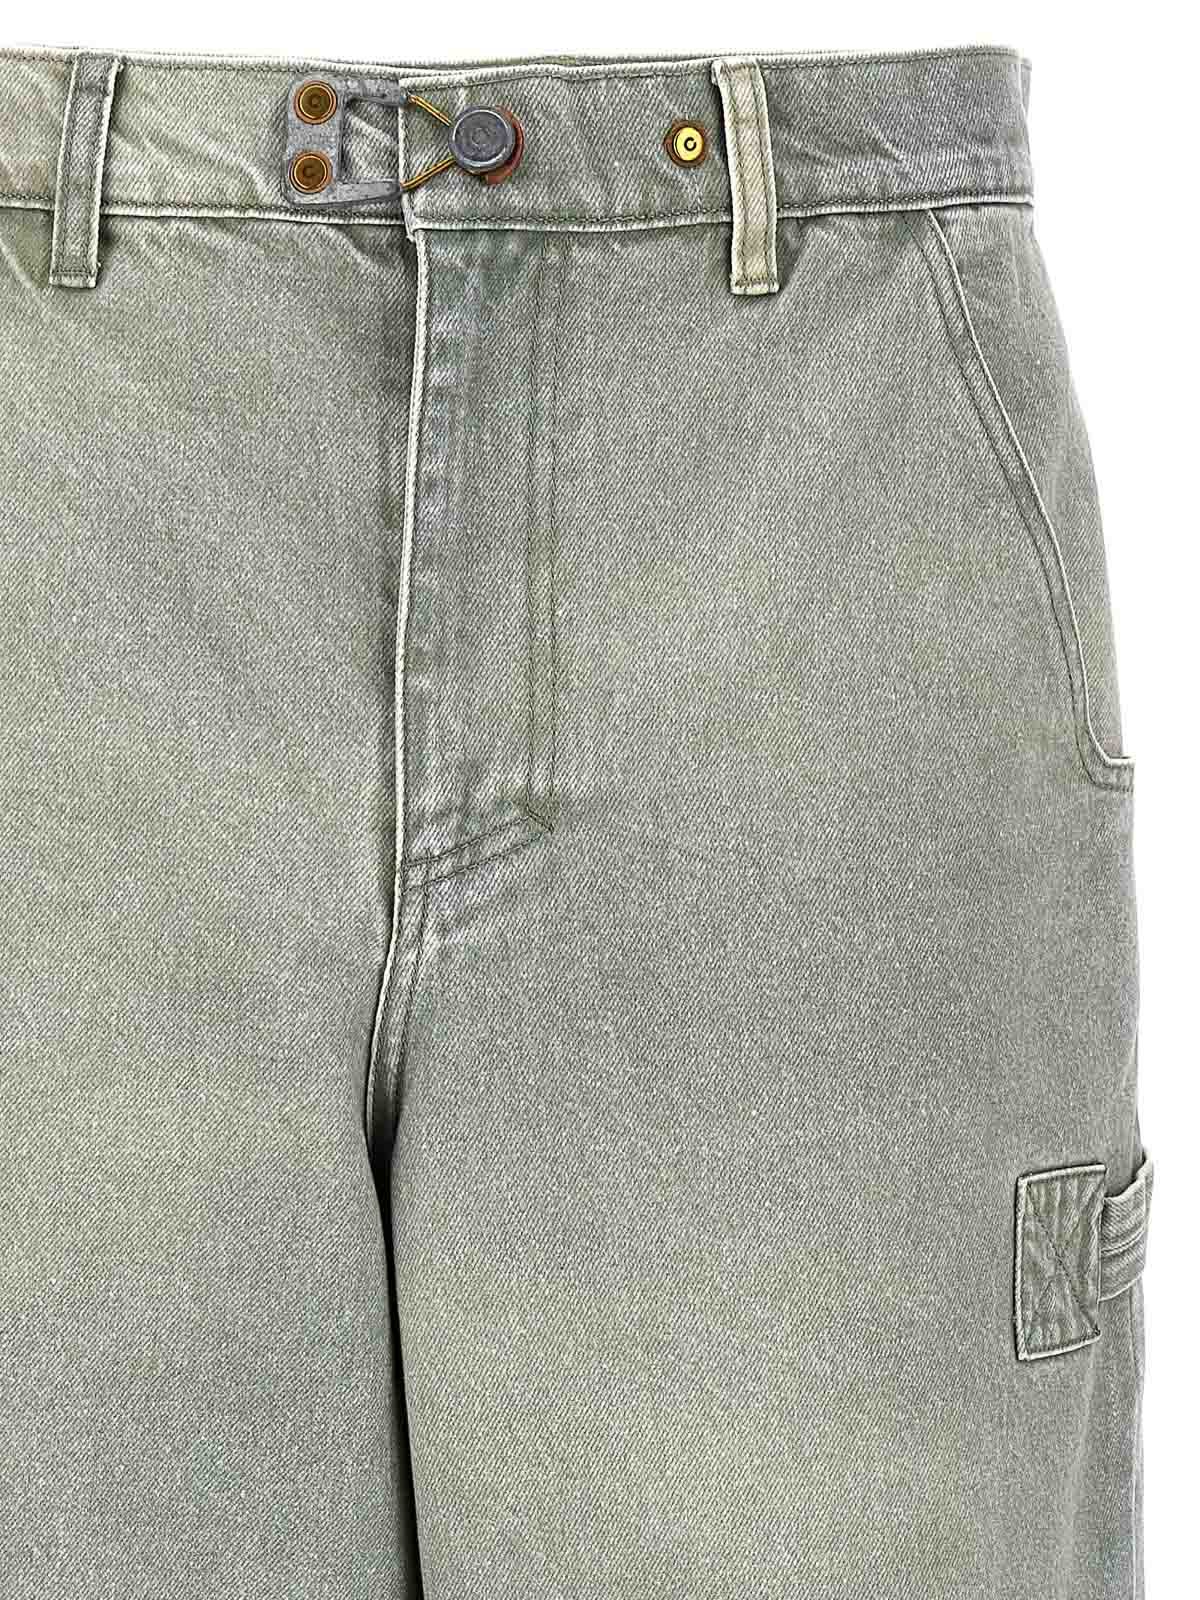 Shop Objects Iv Life Baggy Jeans In Verde